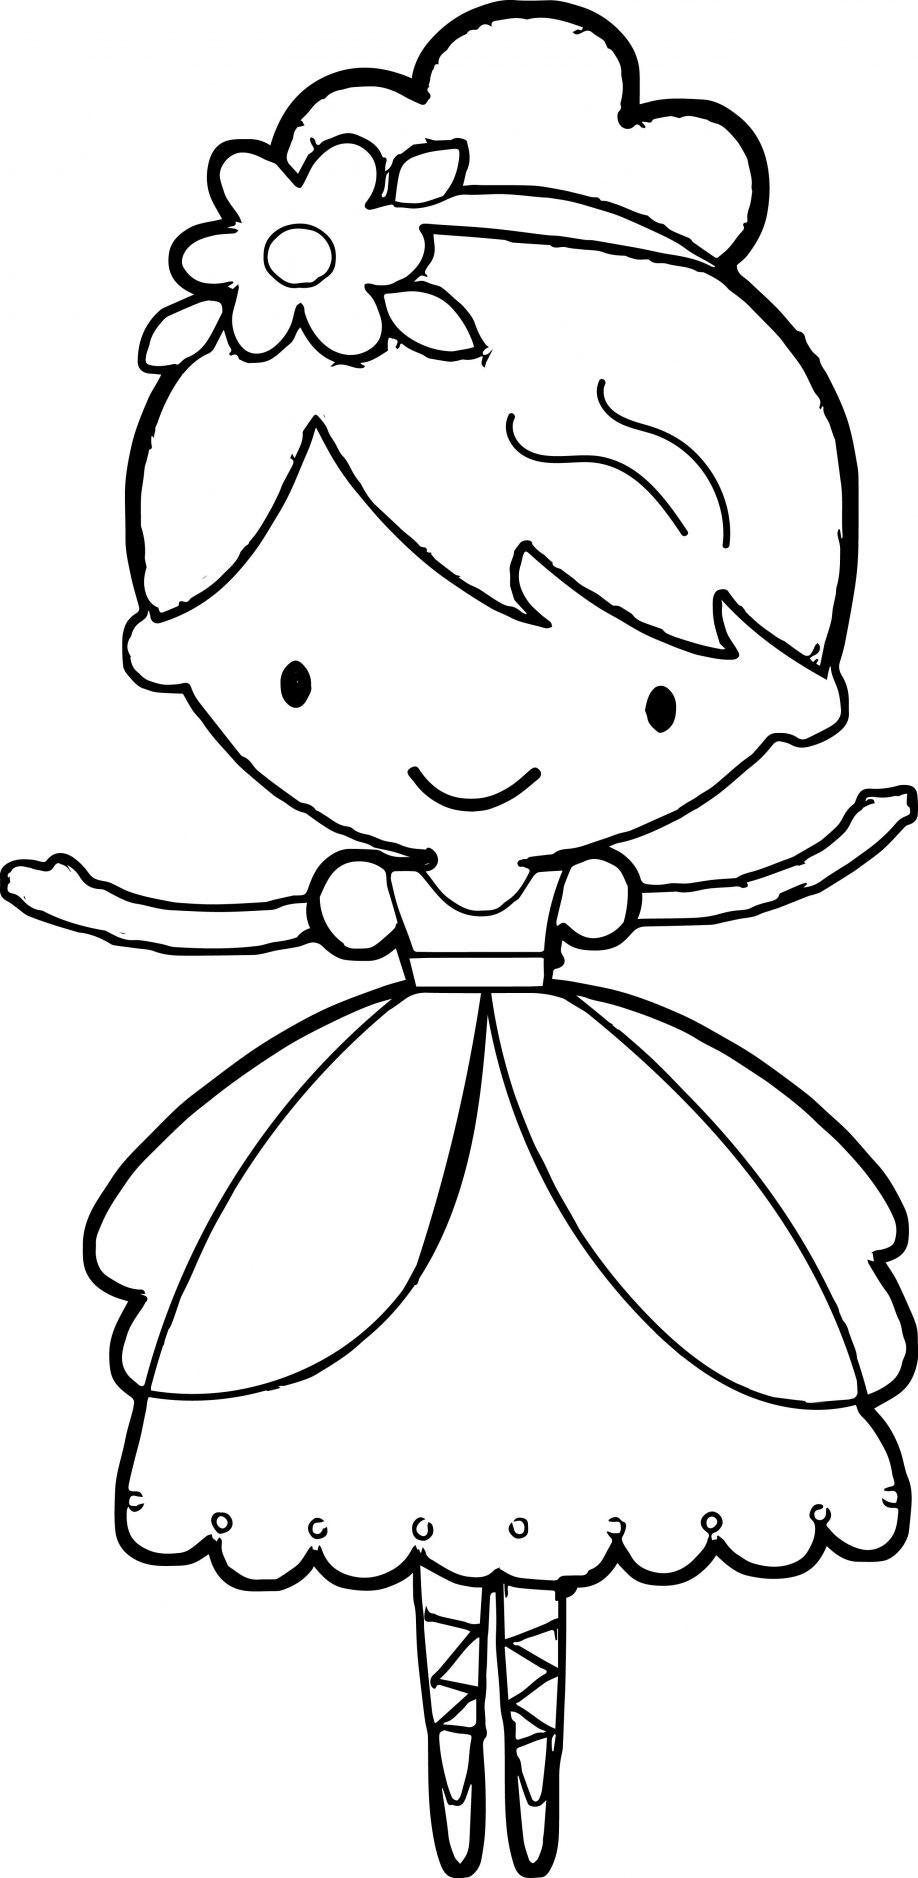 Ballerina Coloring Pages For Girls
 25 Ballerina Coloring Pages ColoringStar